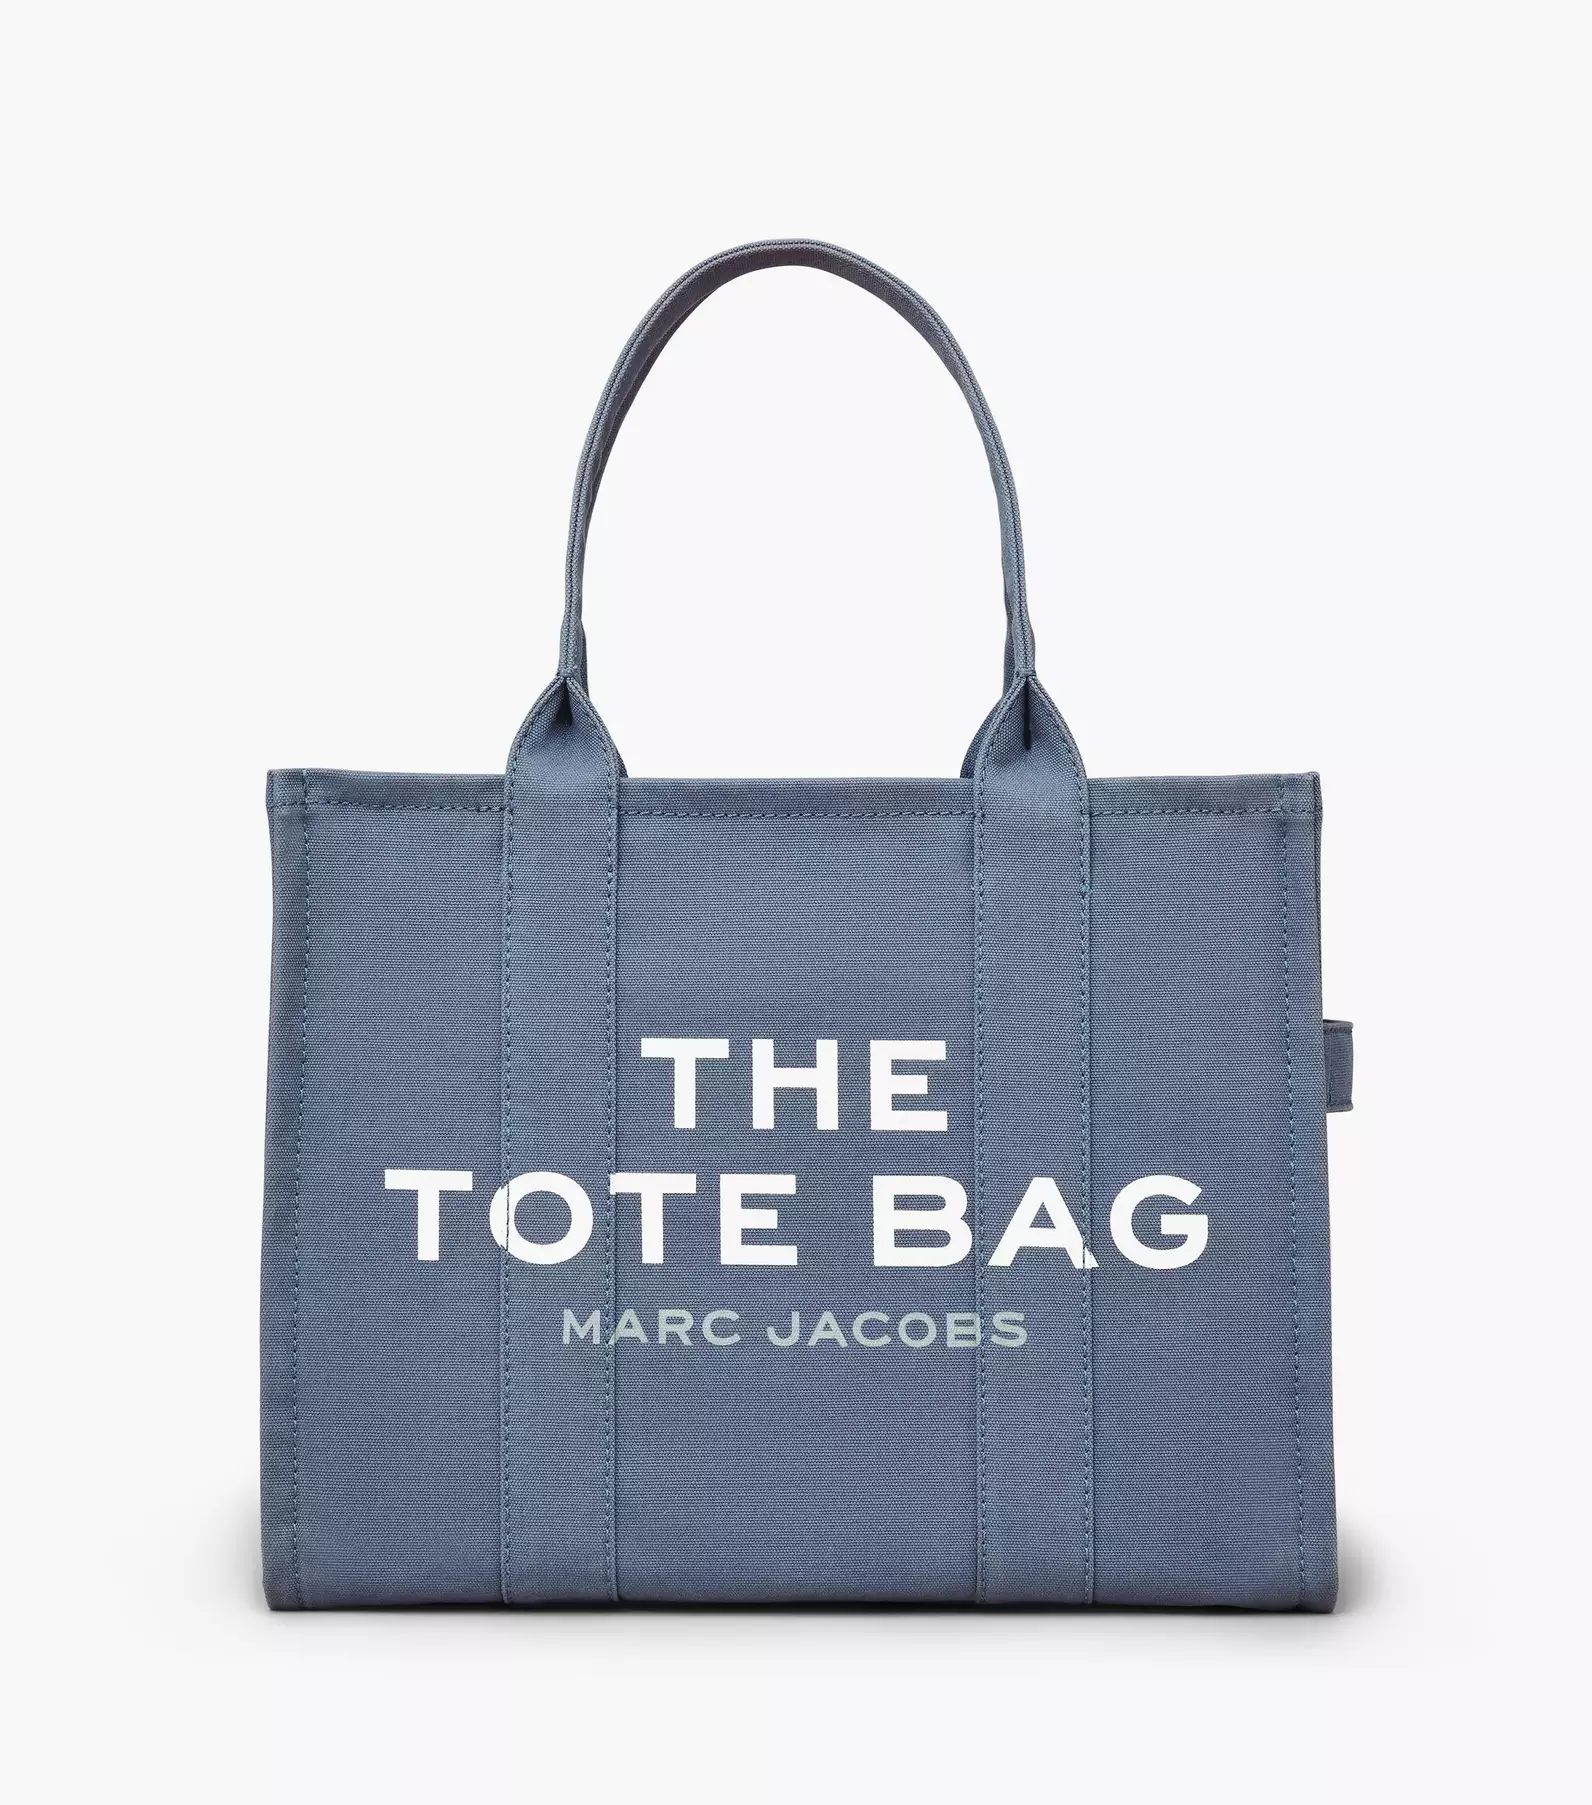 These are the new-in bags at the very top of my wish list